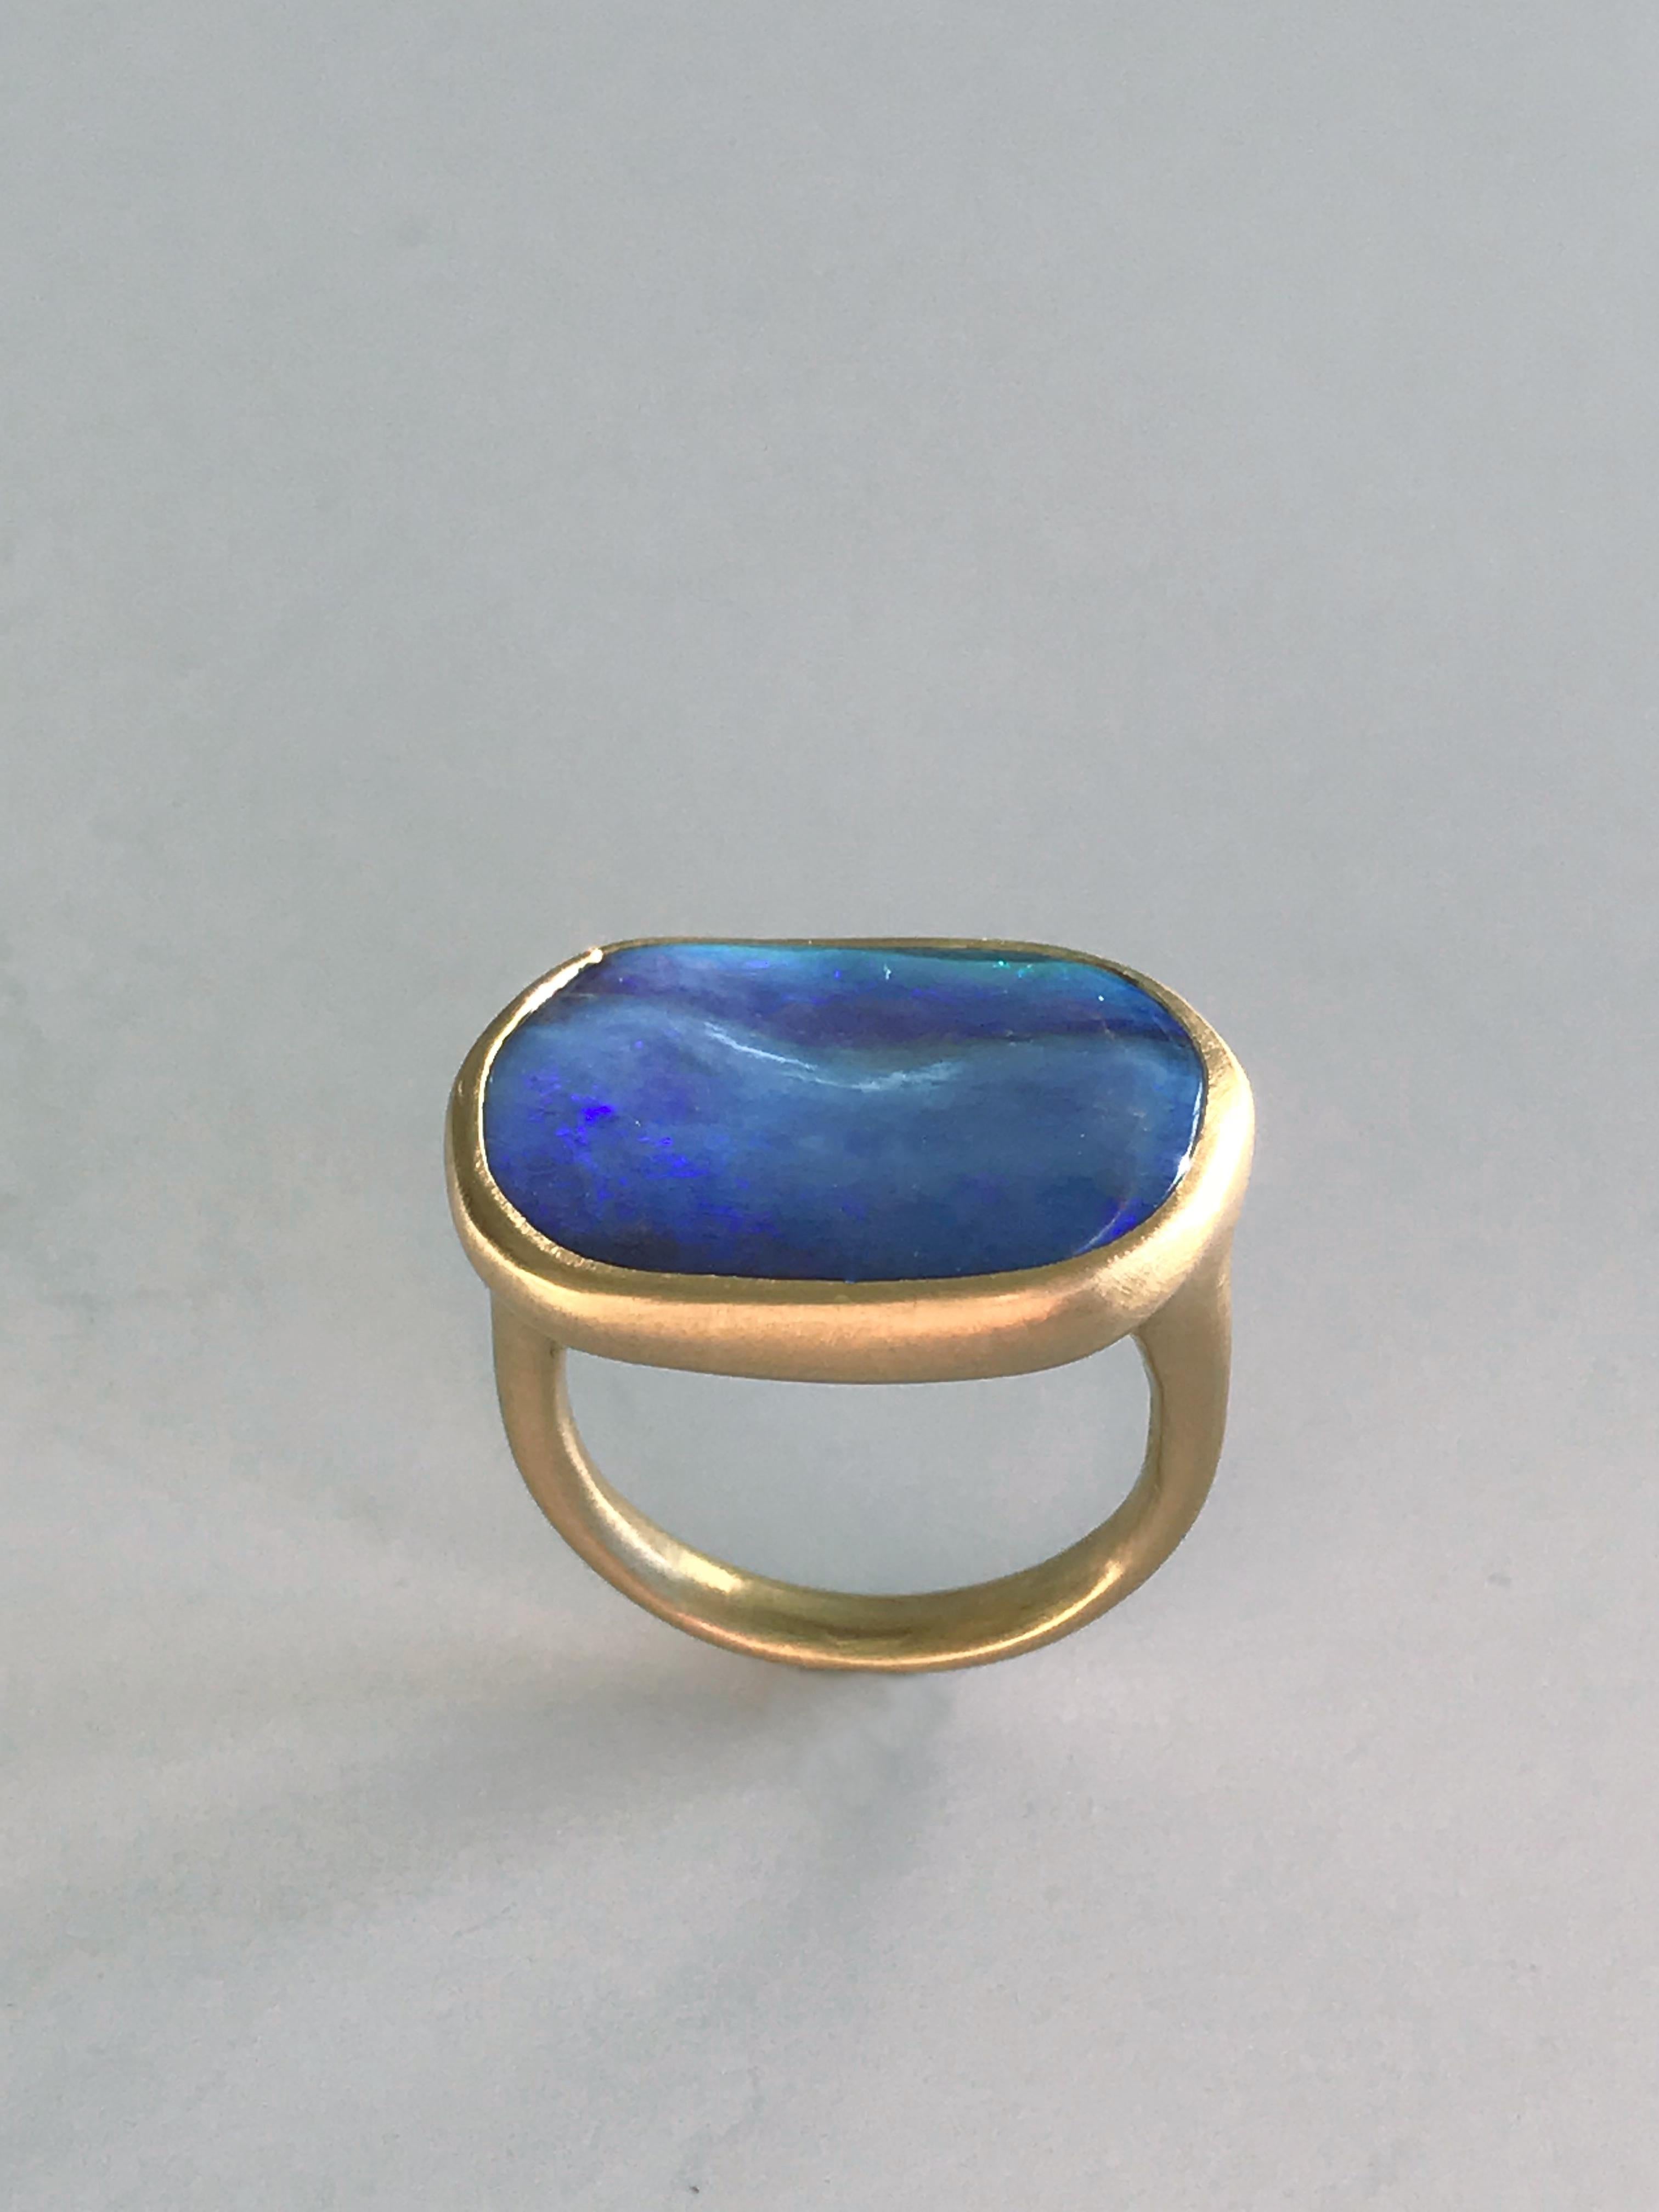 Dalben design One of a kind 18 kt yellow gold matte finishing ring with a 13,5 carat bezel-set deep blue Australian Boulder Opal  .  
The stone has sea bed deep blue  colors .
Ring size 7 1/4 - EU 55 re-sizable to most finger sizes.  
Bezel setting